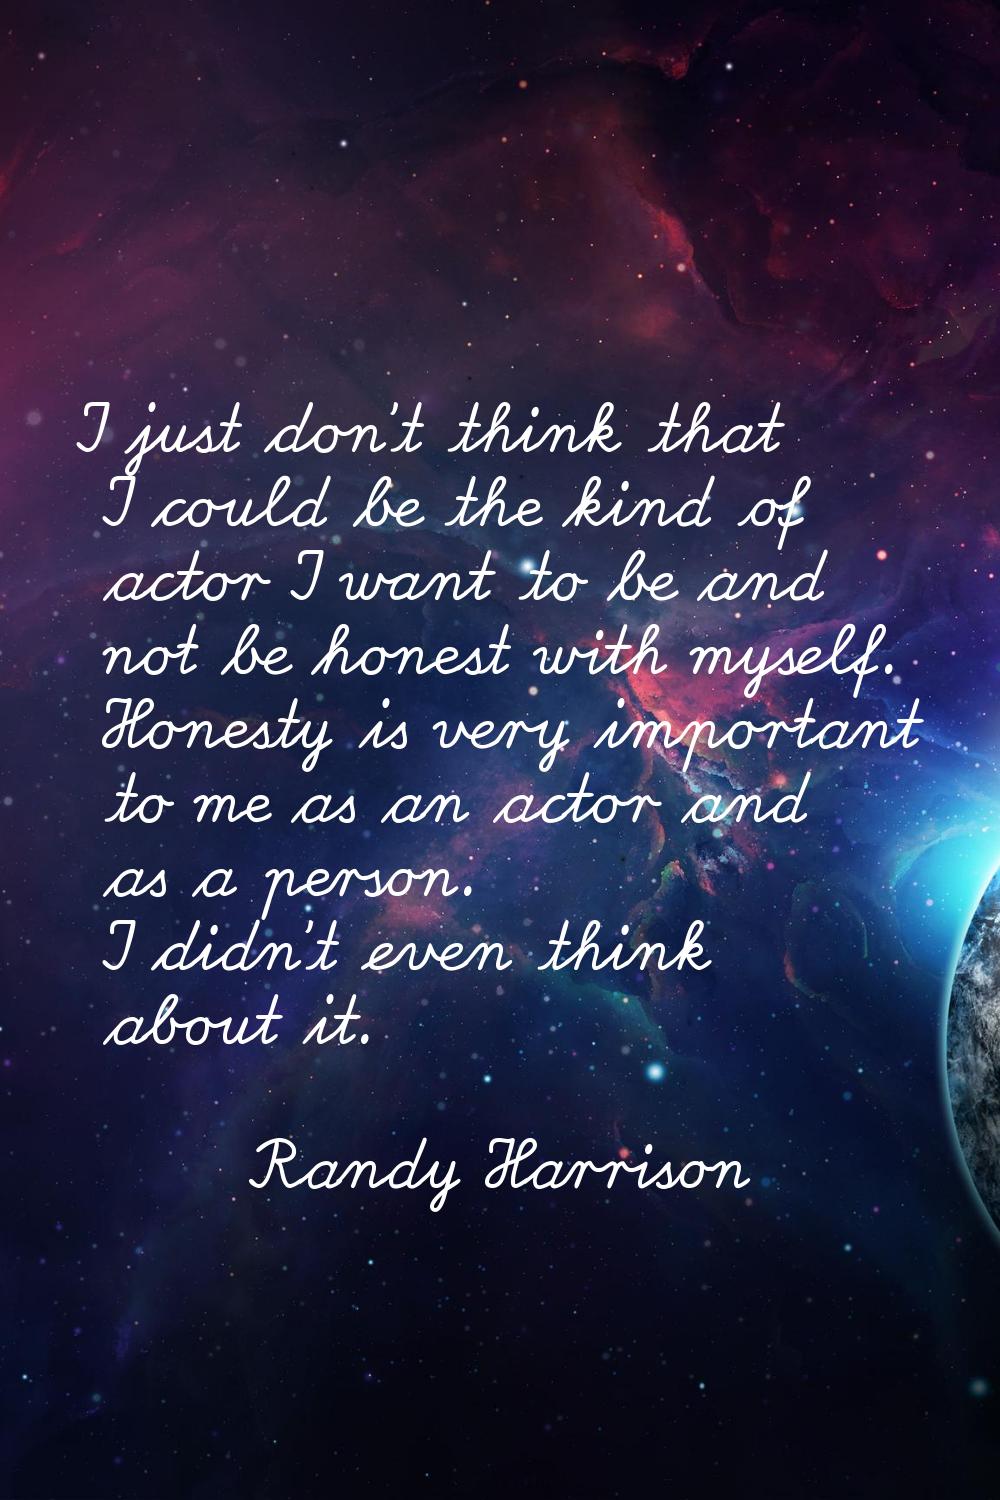 I just don't think that I could be the kind of actor I want to be and not be honest with myself. Ho